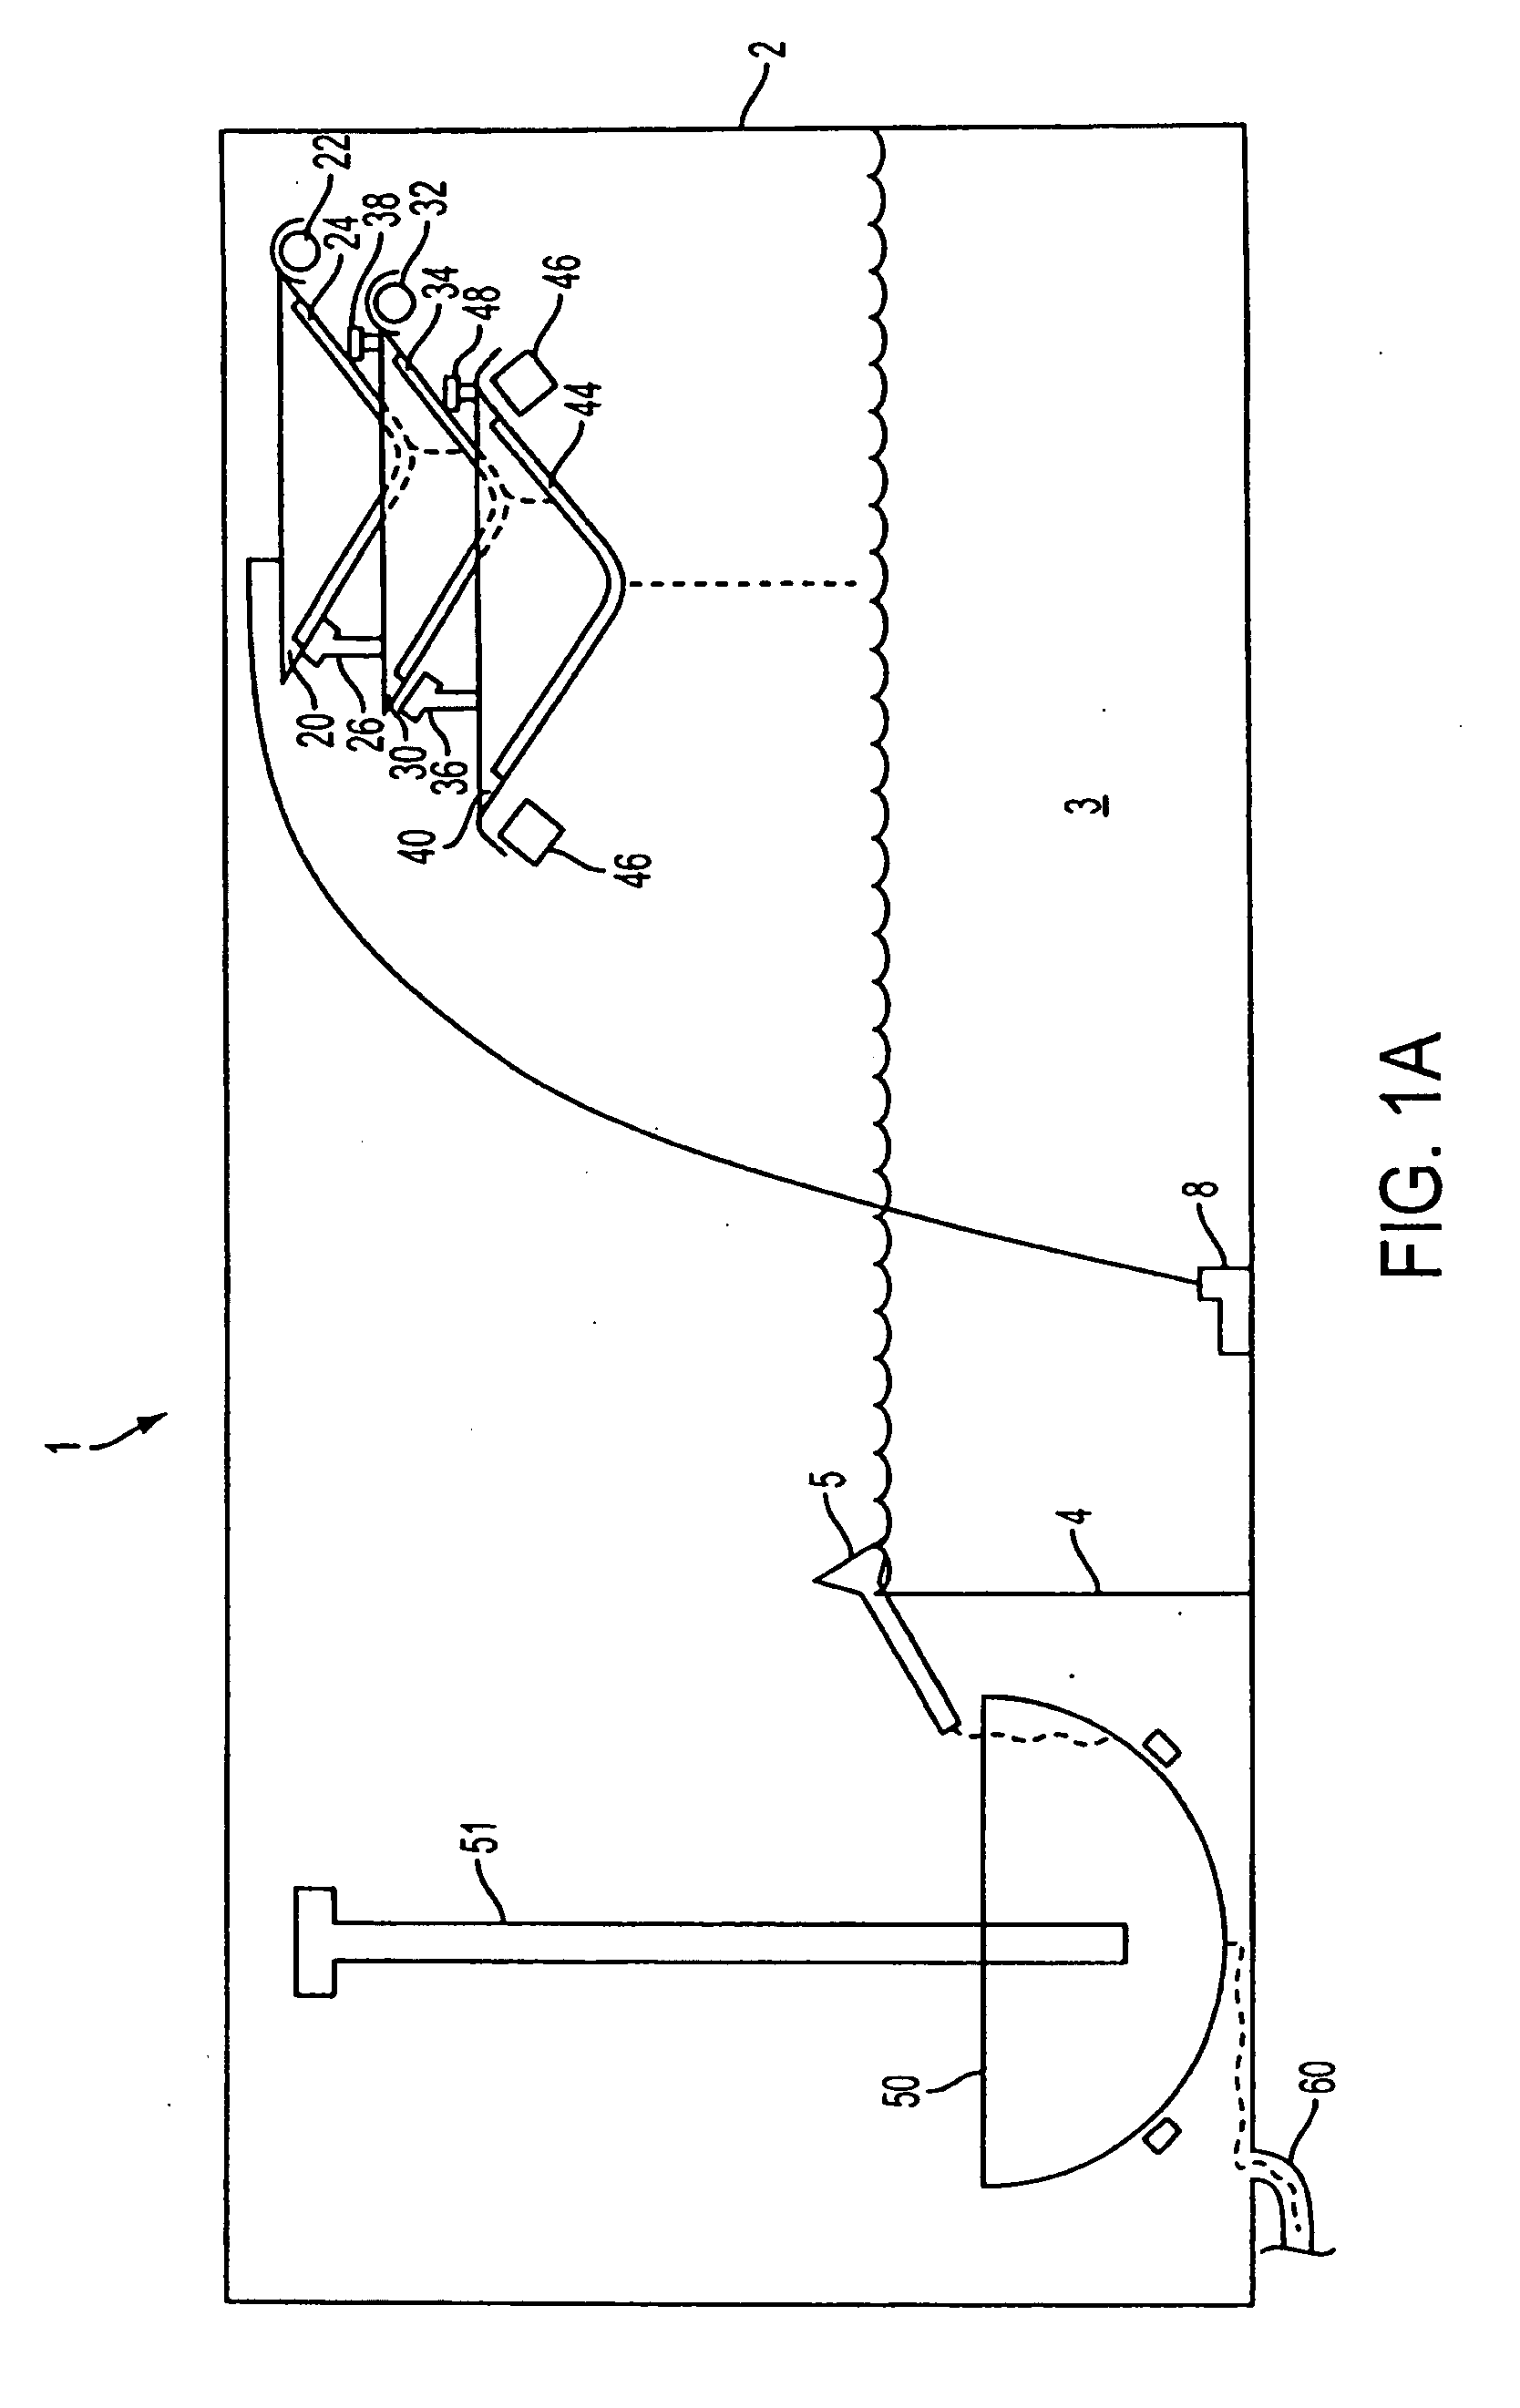 Methods and apparatus for filtering water